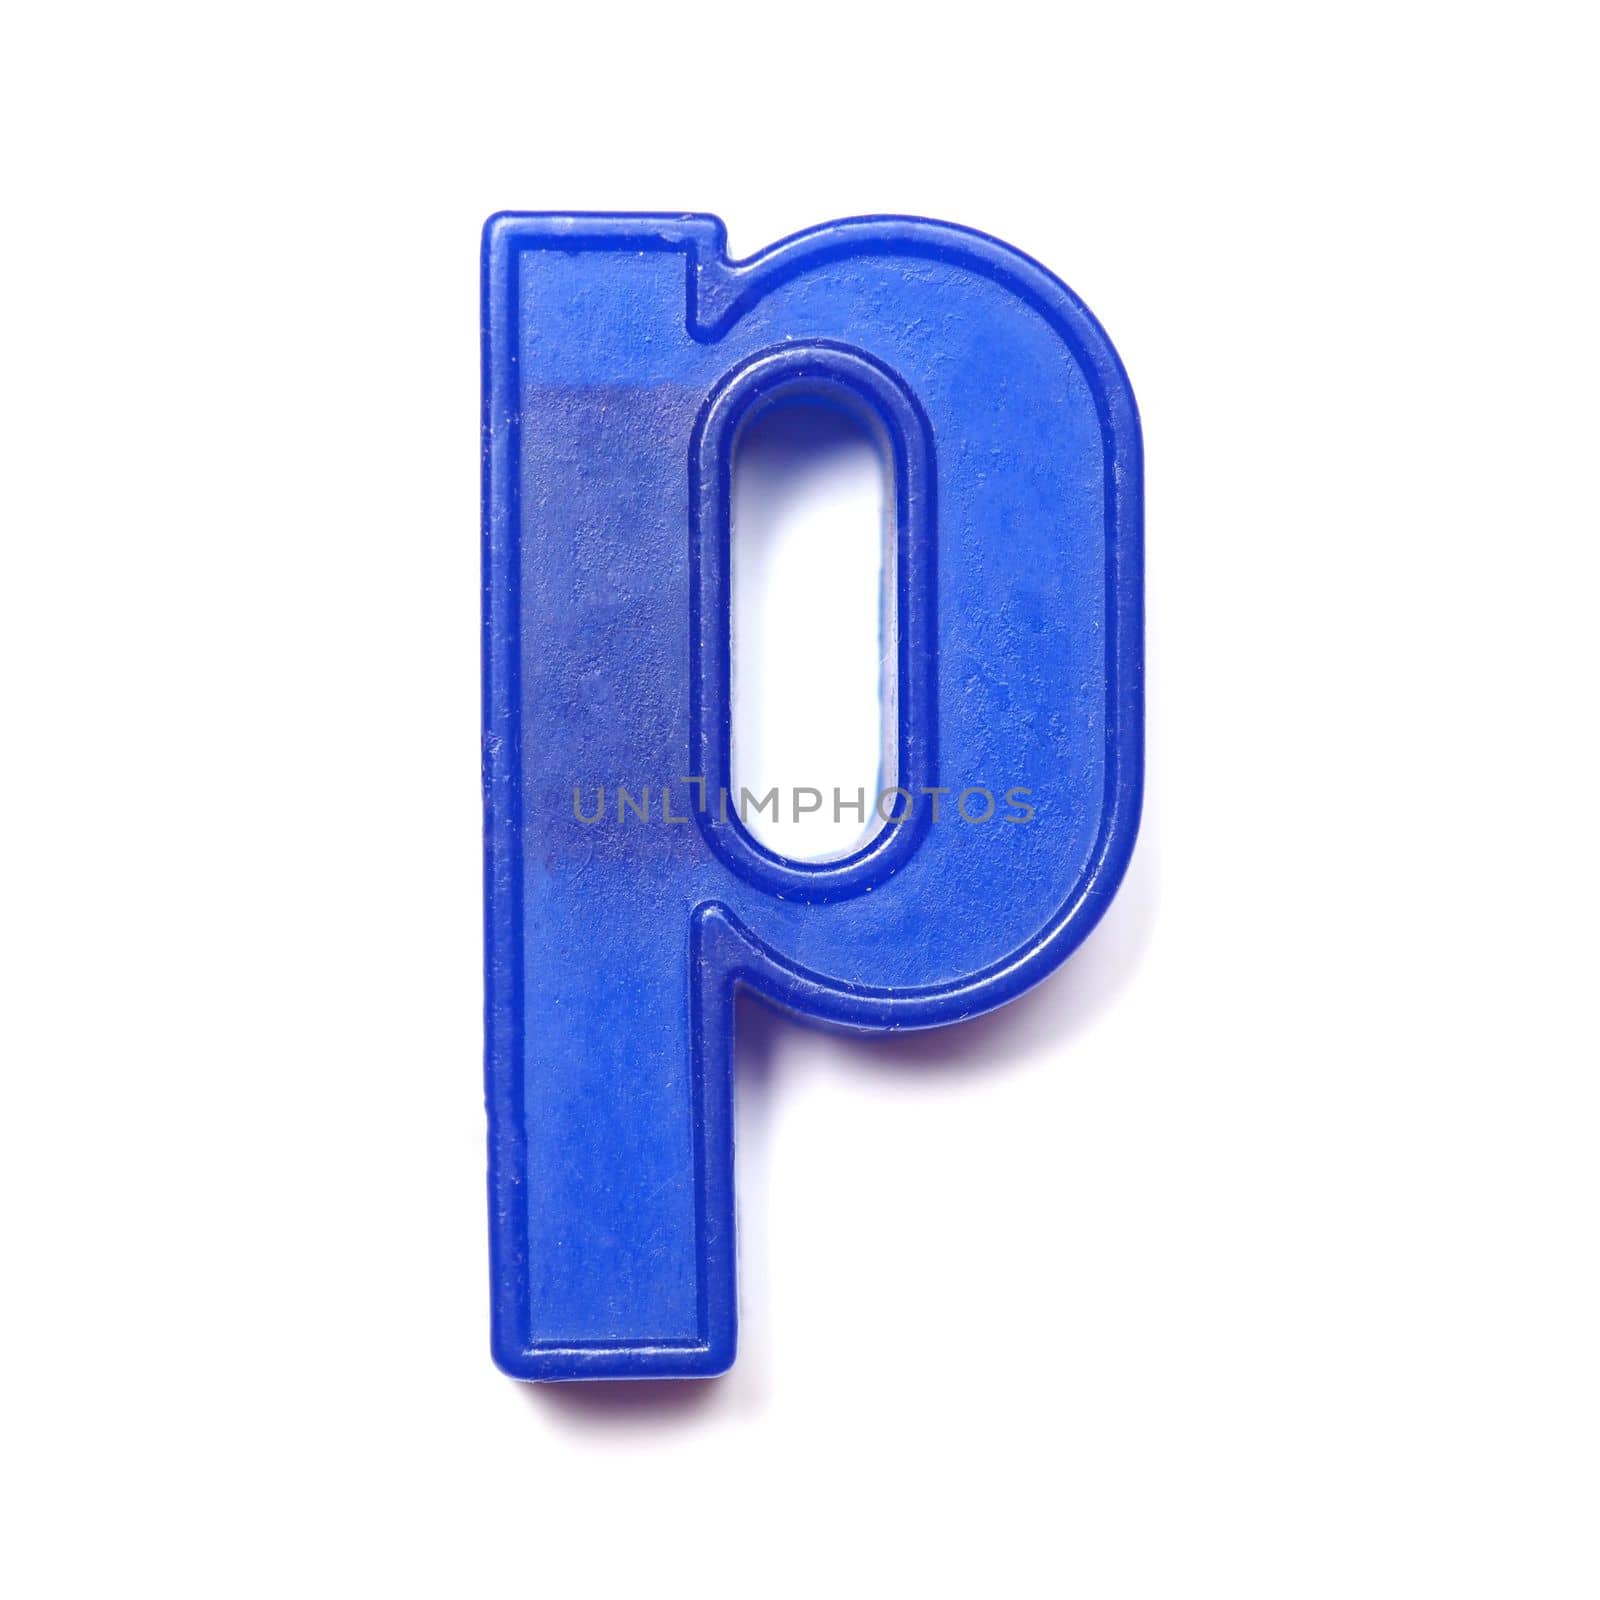 Magnetic lowercase letter P by claudiodivizia